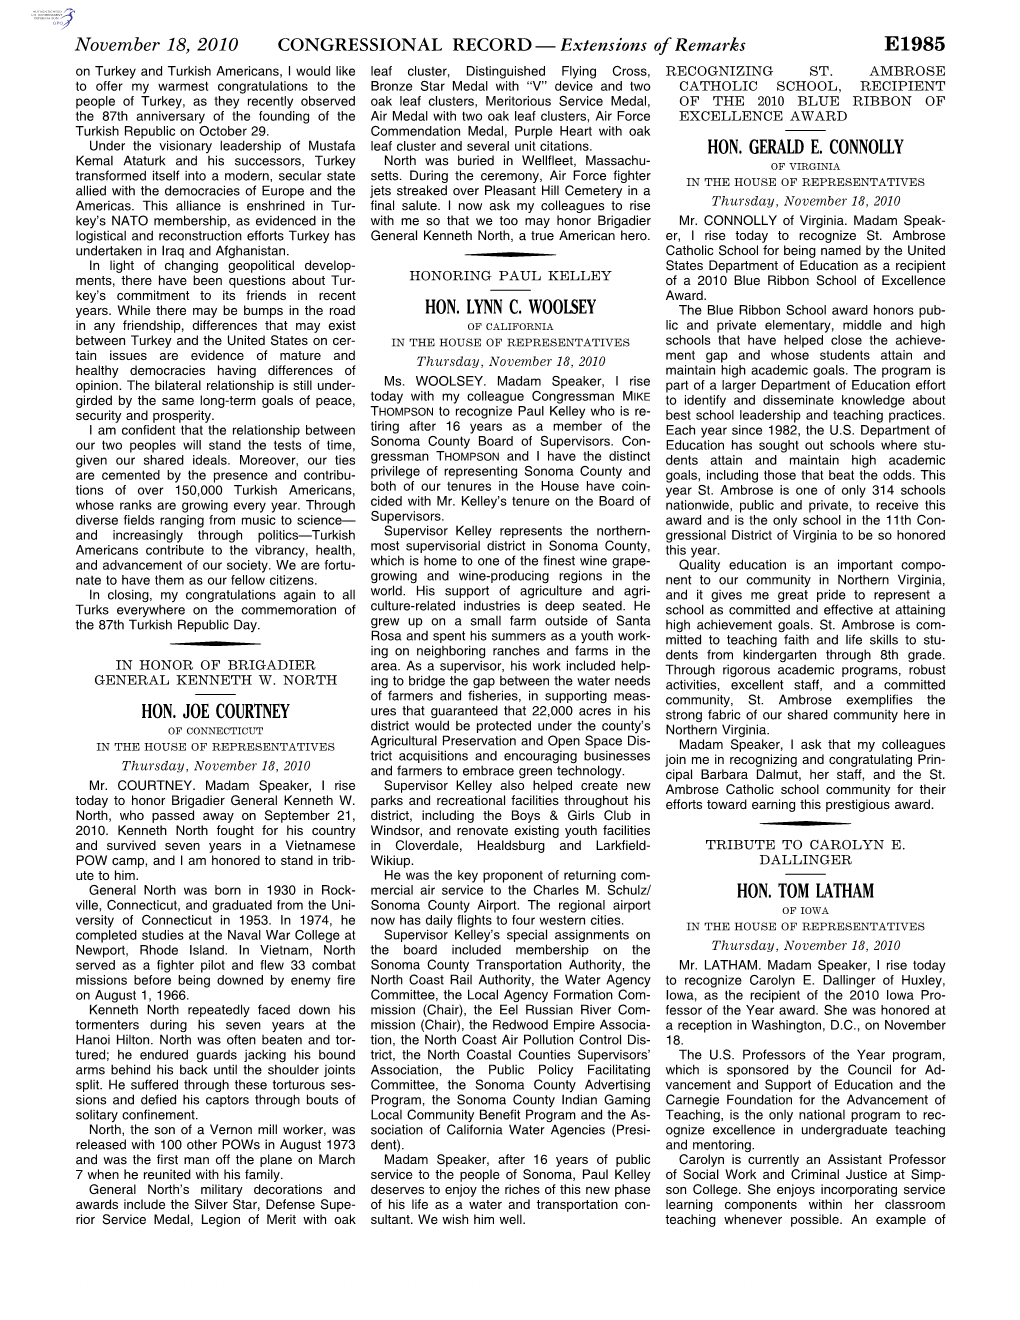 CONGRESSIONAL RECORD— Extensions of Remarks E1985 HON